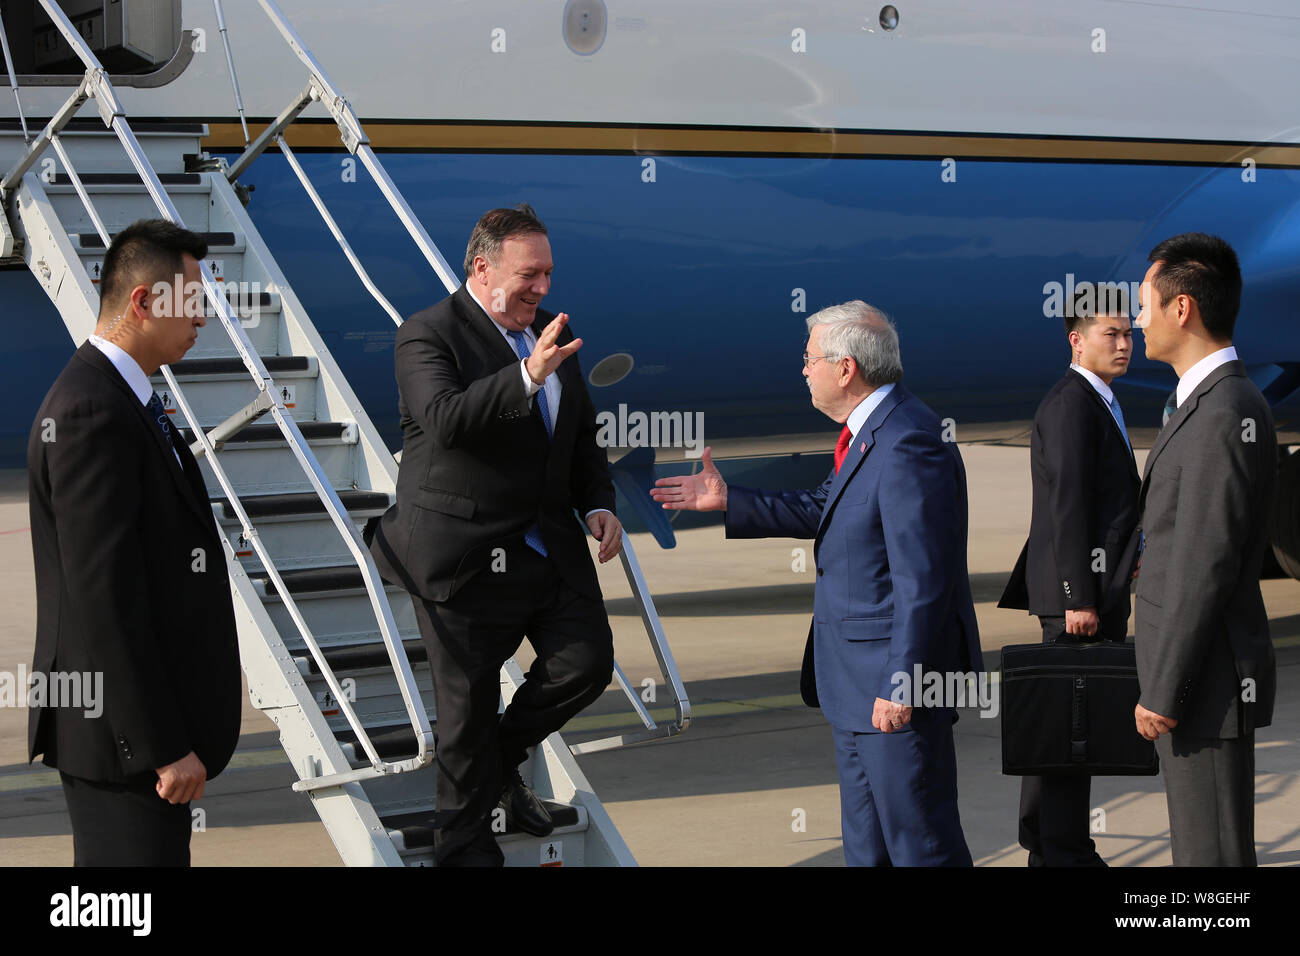 U.S. Secretary of State Mike Pompeo is greeted by U.S. Ambassador to China Terry Branstad upon arrival to Beijing, China on June 14, 2018. Stock Photo